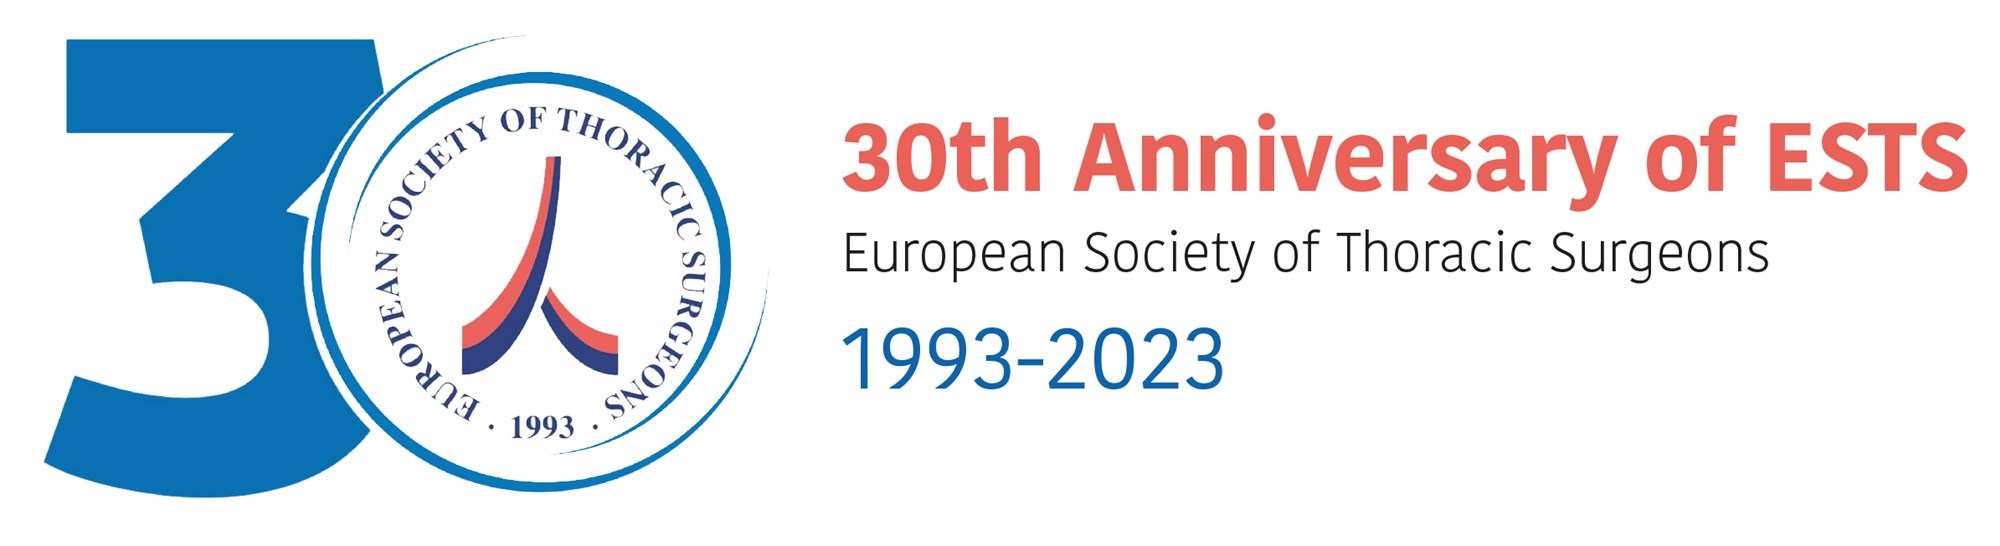 Live Streaming of Presidential Address at 31st European Conference on General Thoracic Surgery image